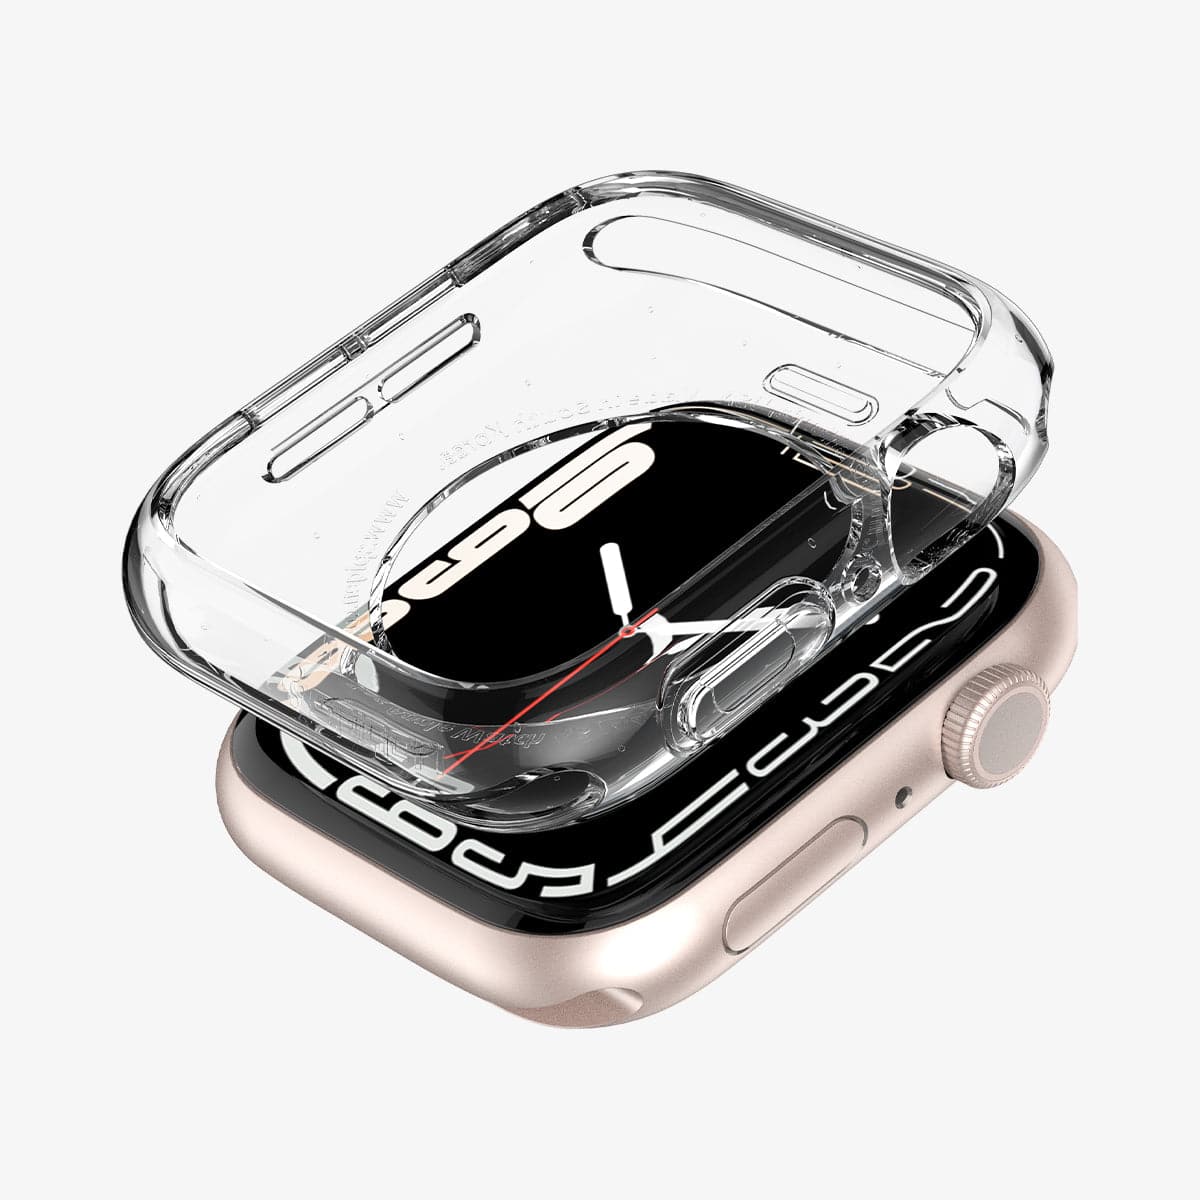 ACS04195 - Apple Watch Series (Apple Watch (41mm)) Case Liquid Crystal in crystal clear showing the case hovering above the watch face